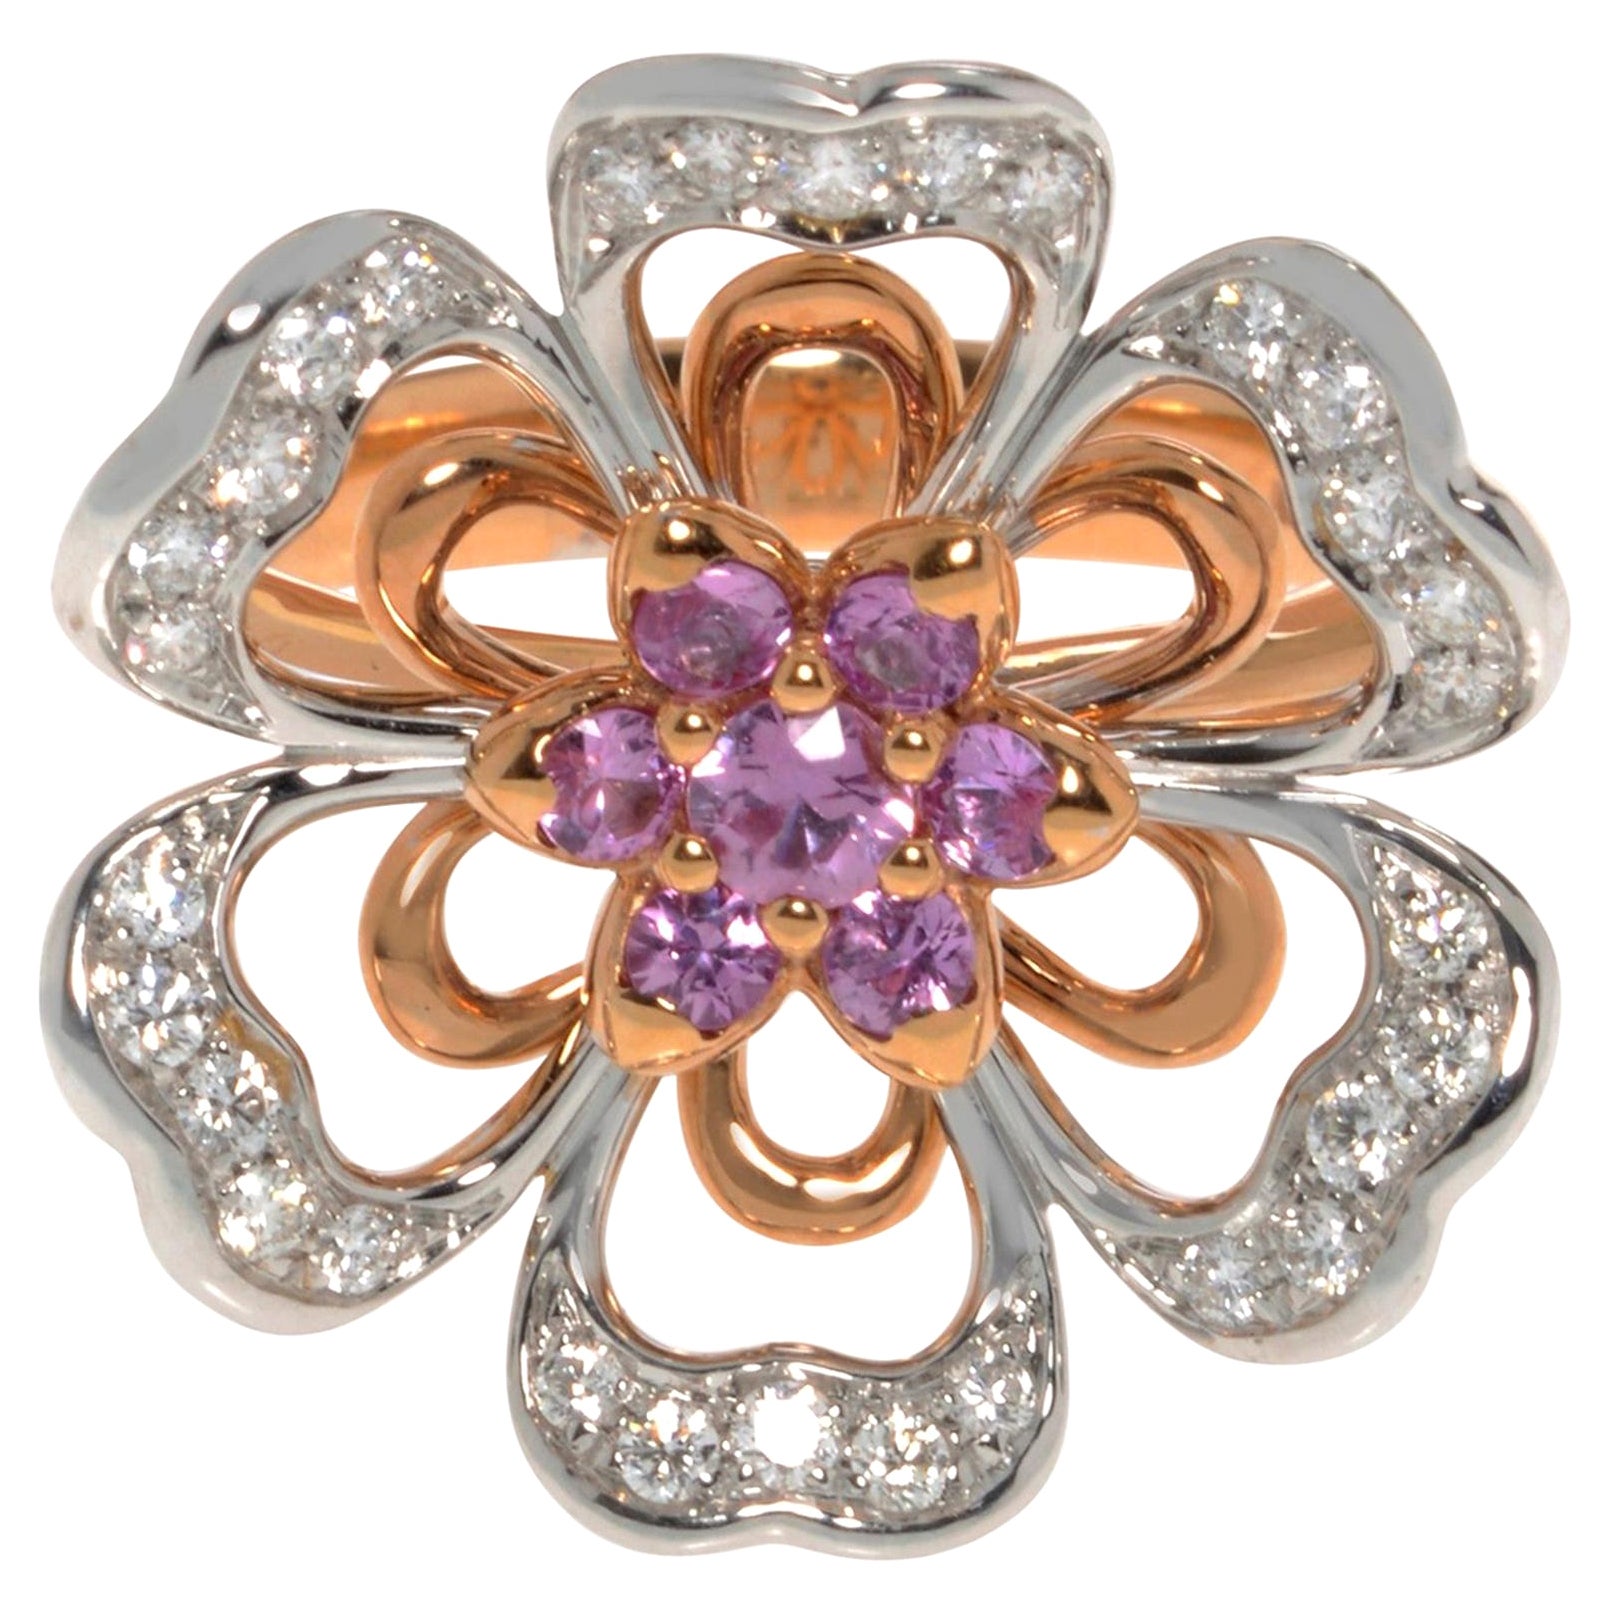 Luca Carati Diamond & Pink Sapphire Cocktail Ring 18K Gold Size 7 For Sale